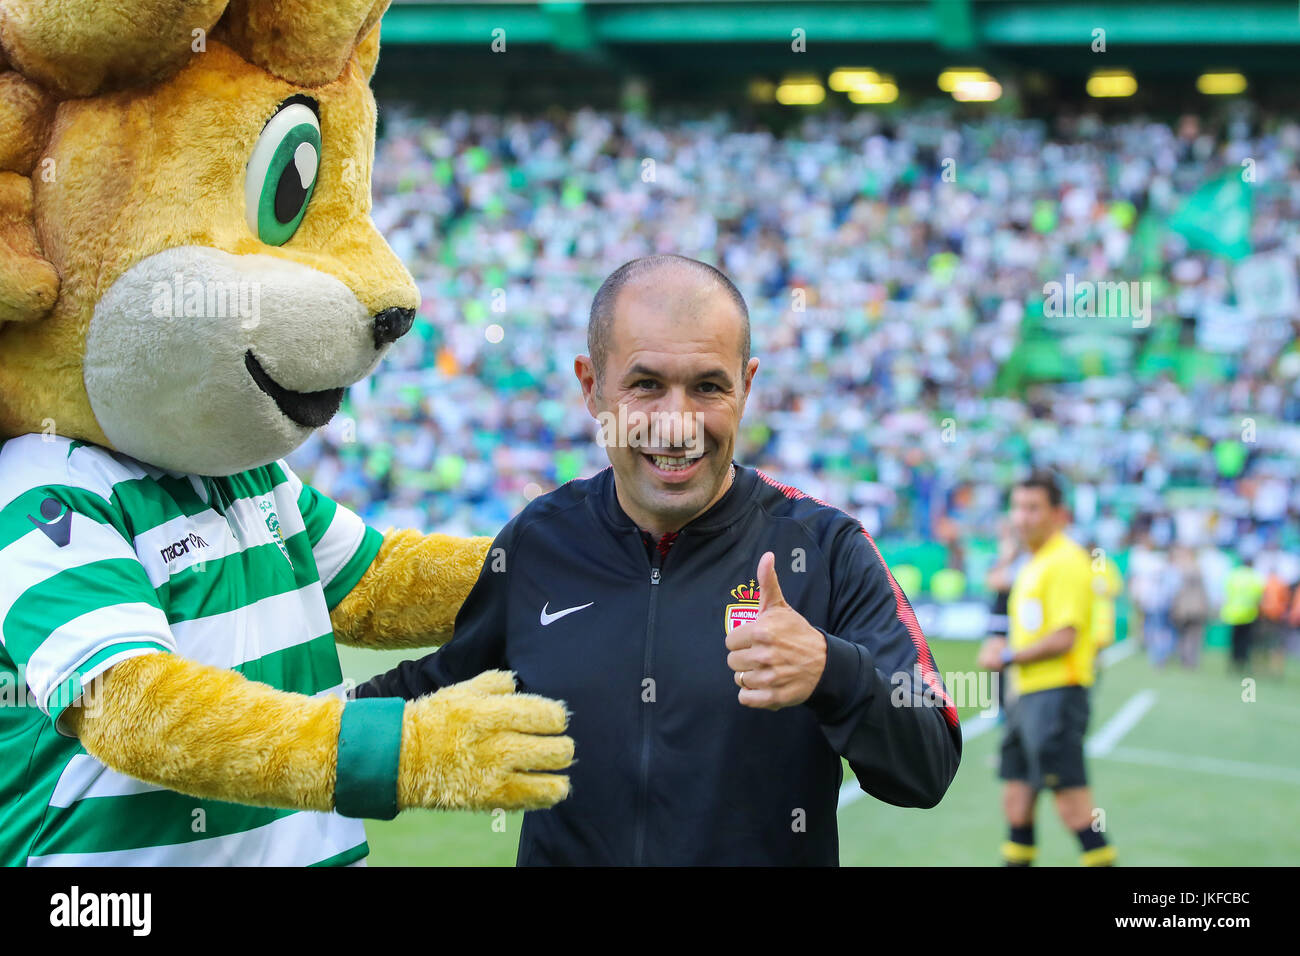 Lisbon, Portugal. 22nd July, 2017. Monaco«s head coach Leonardo Jardim from Portugal during the Pre-season Friendly match between Sporting CP and AS Monaco at Estadio Jose Alvalade on July 22, 2017 in Lisbon, Portugal.. Credit: Bruno Barros/Alamy Live News Stock Photo